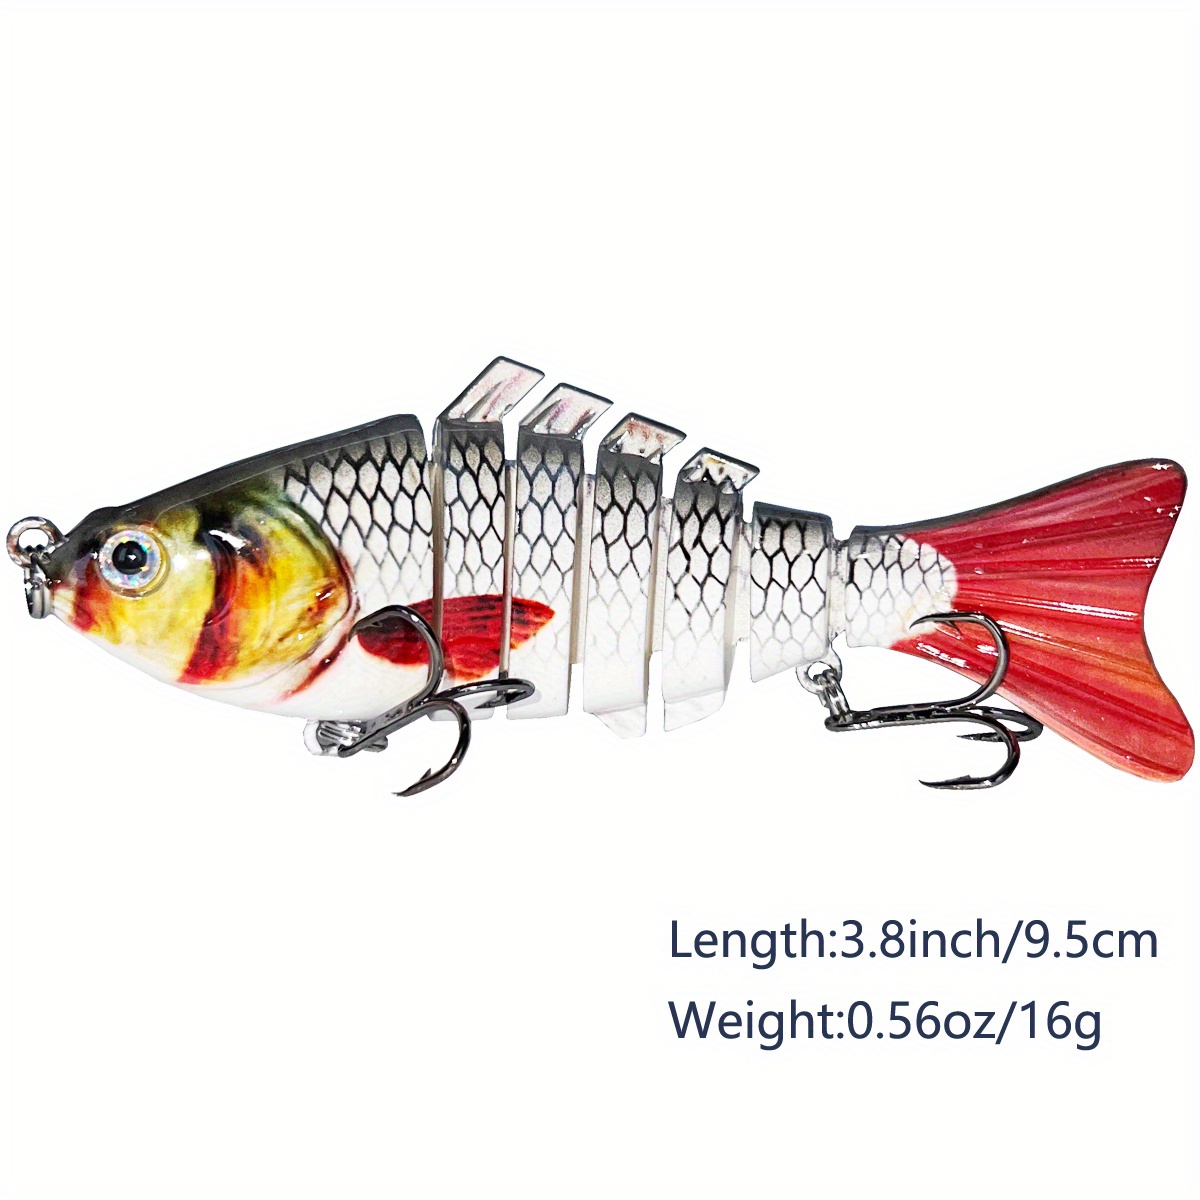 Silver Scaled FRY Multi Jointed Fishing Lure Swimbait perch pike